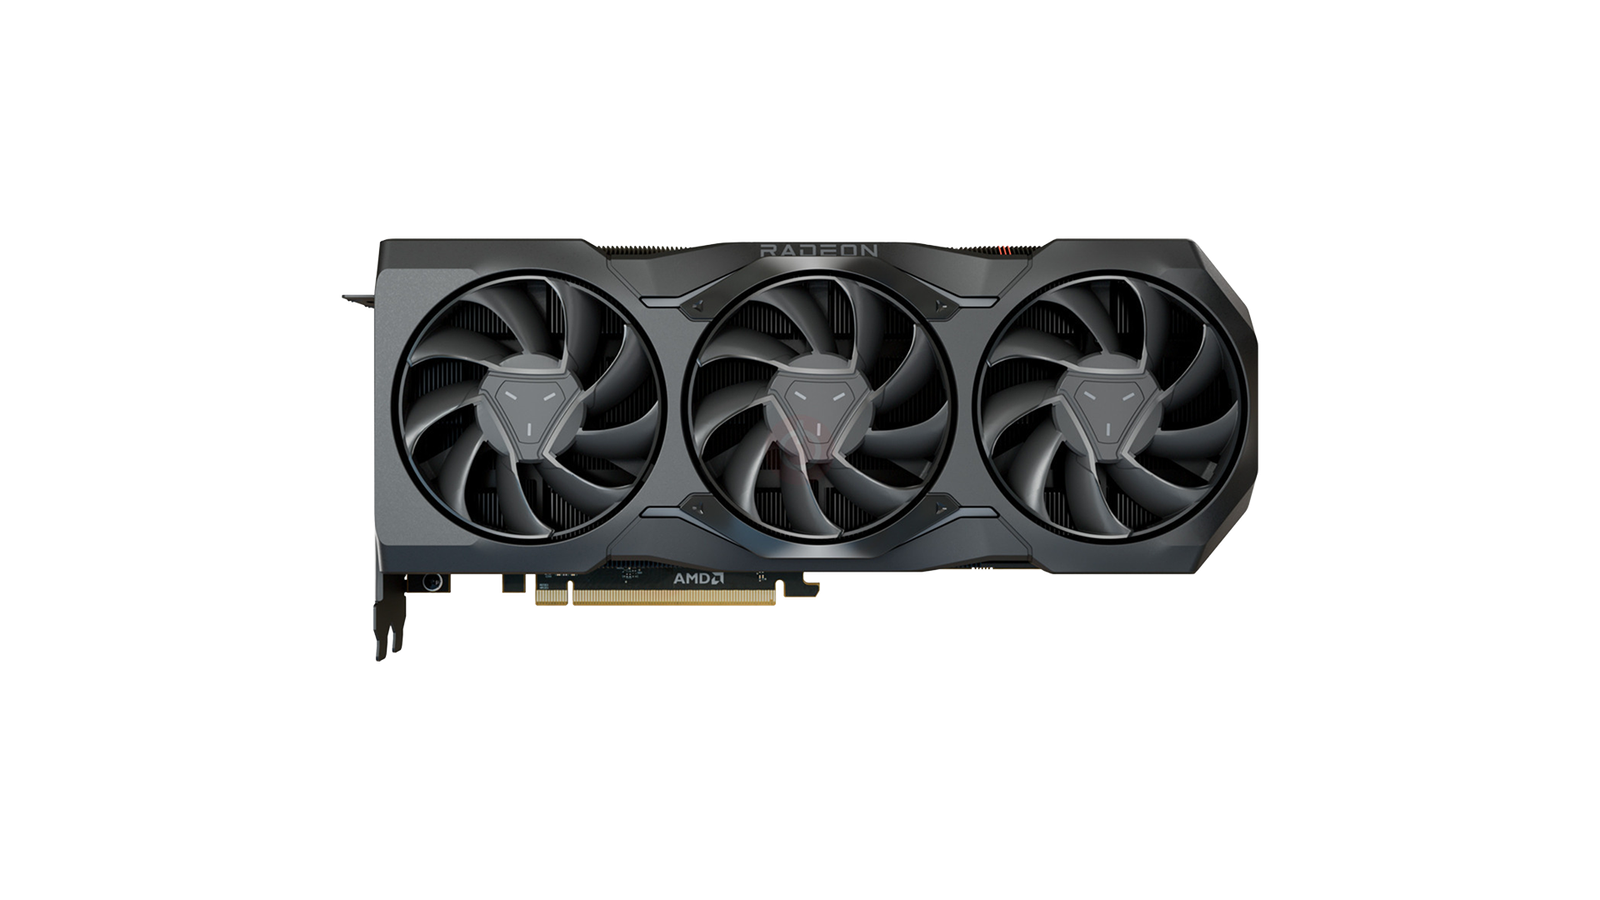 AMD Radeon RX 7900 XTX - The best AMD graphics card for gaming